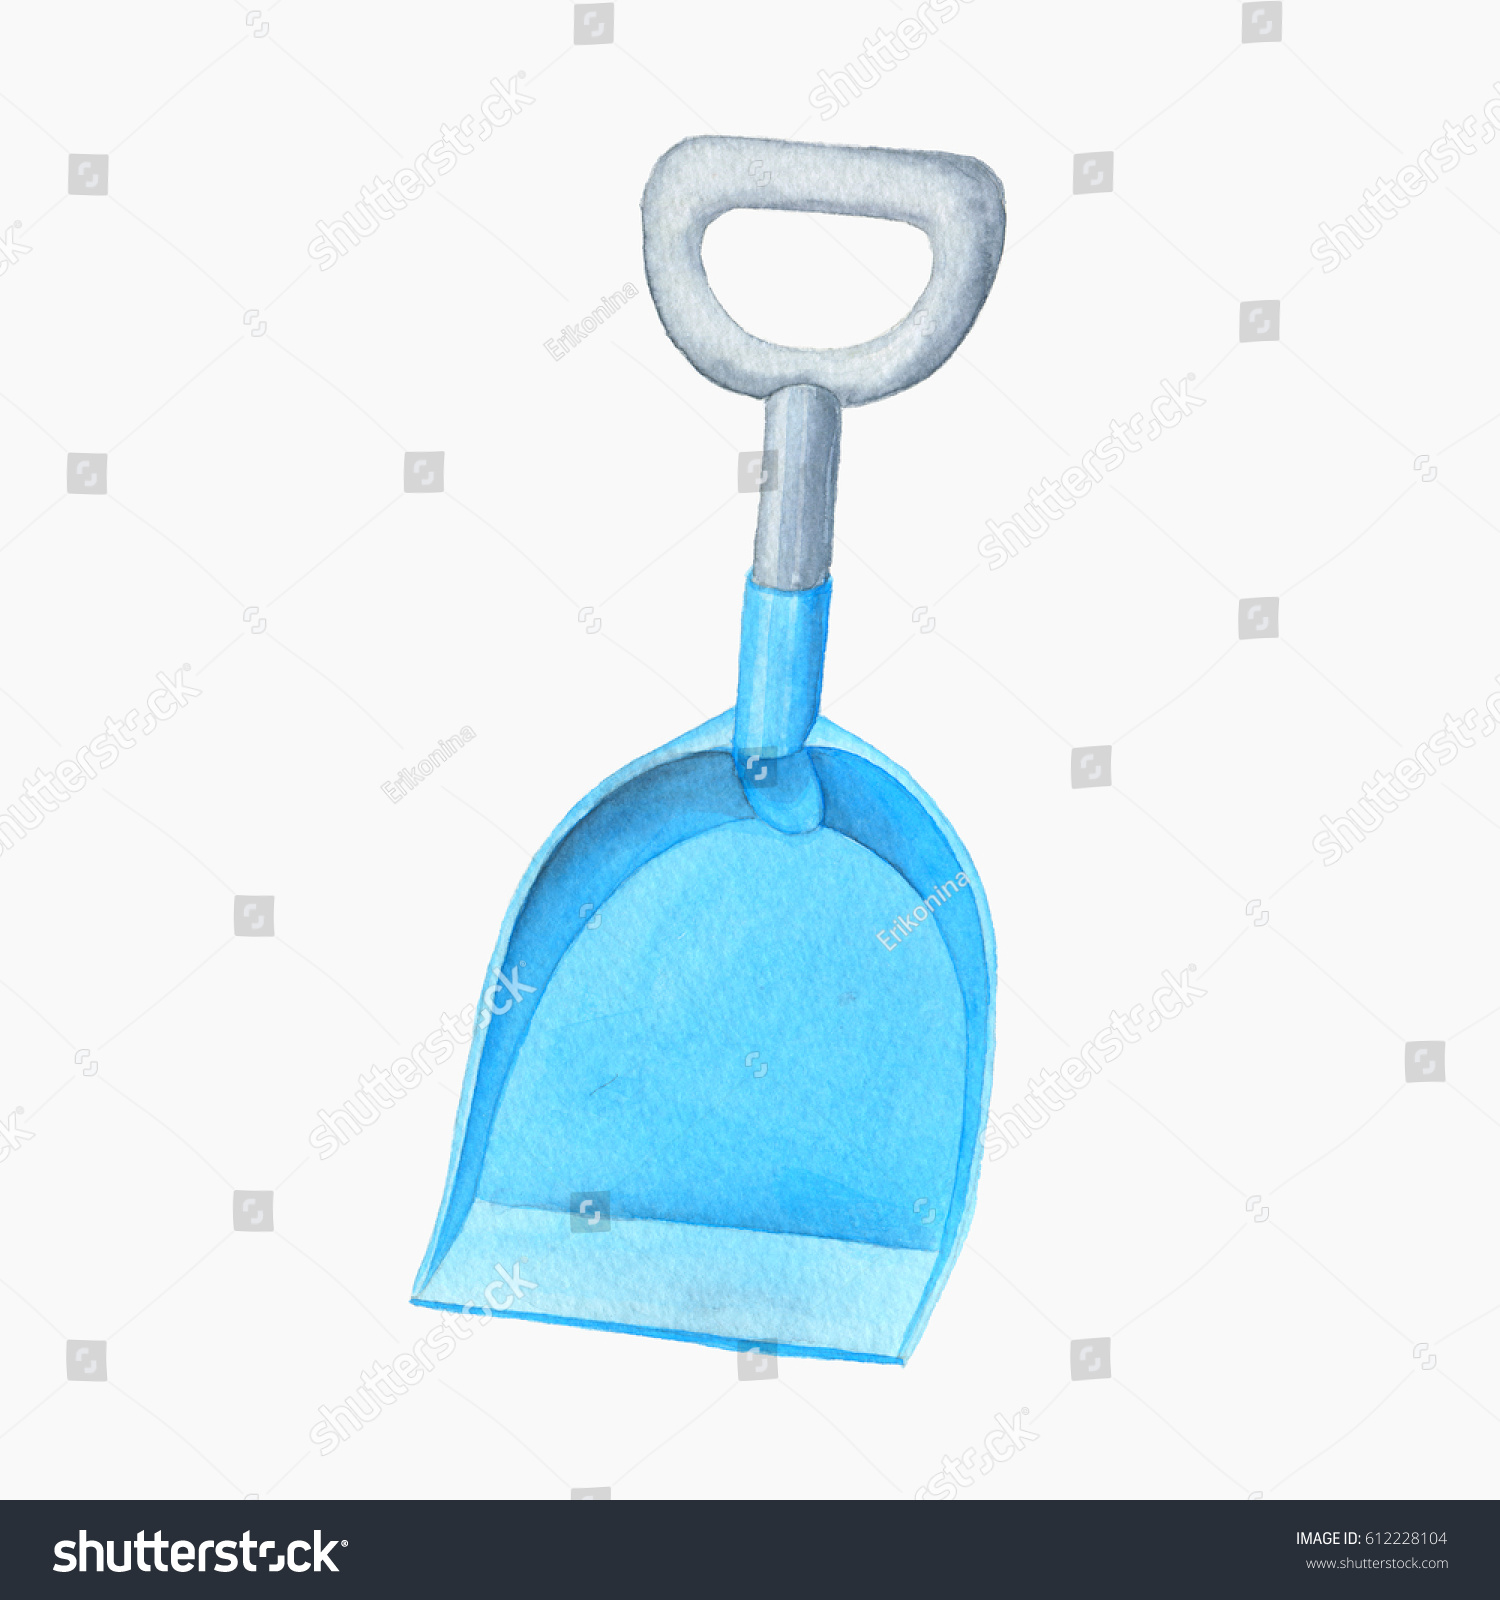 Childs Toy Spade Watercolor Illustration Isolated Stock Illustration ...